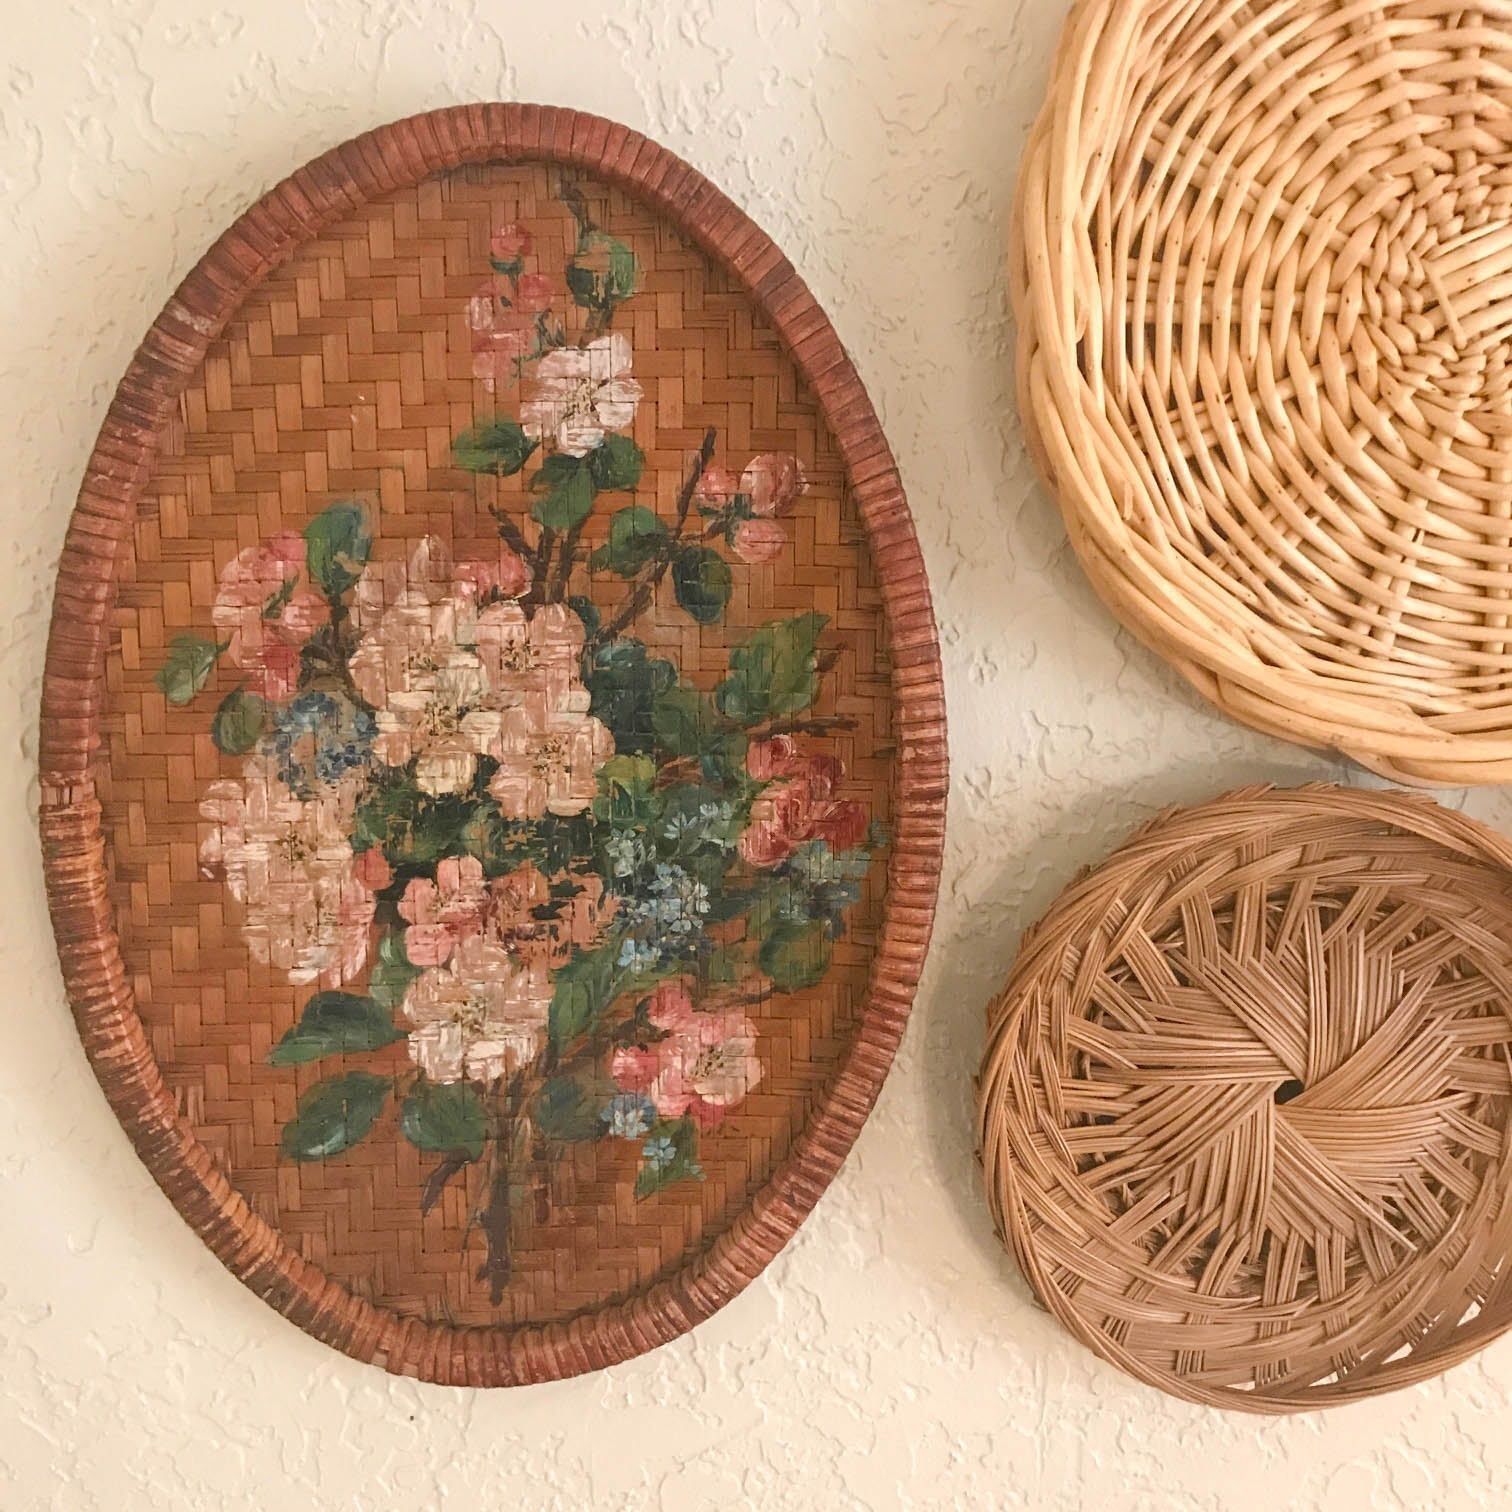 Vintage Wicker Wall Art, Basket Wall Decor, Painted Wicker Wall With Regard To Woven Basket Wall Art (Photo 12 of 20)